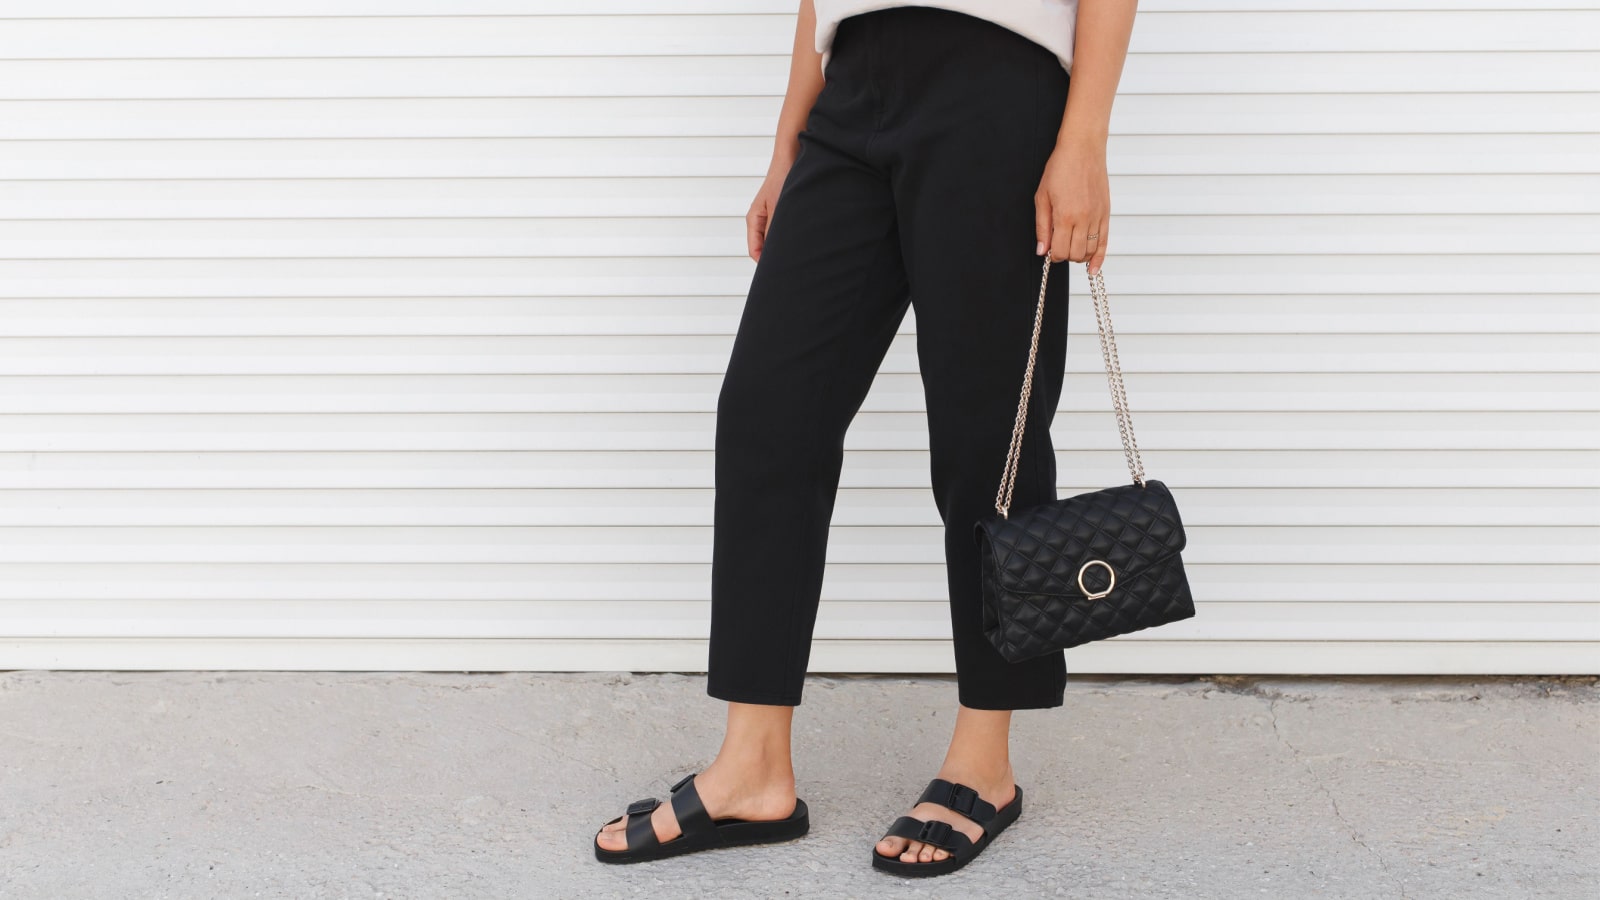 Woman wearing beige t-shirt, black pants, bag and flat sandals walking outdoor near white roller door. Details of stylish trendy basic minimalistic casual outfit. Street fashion. Women's legs, no face Birkenstock